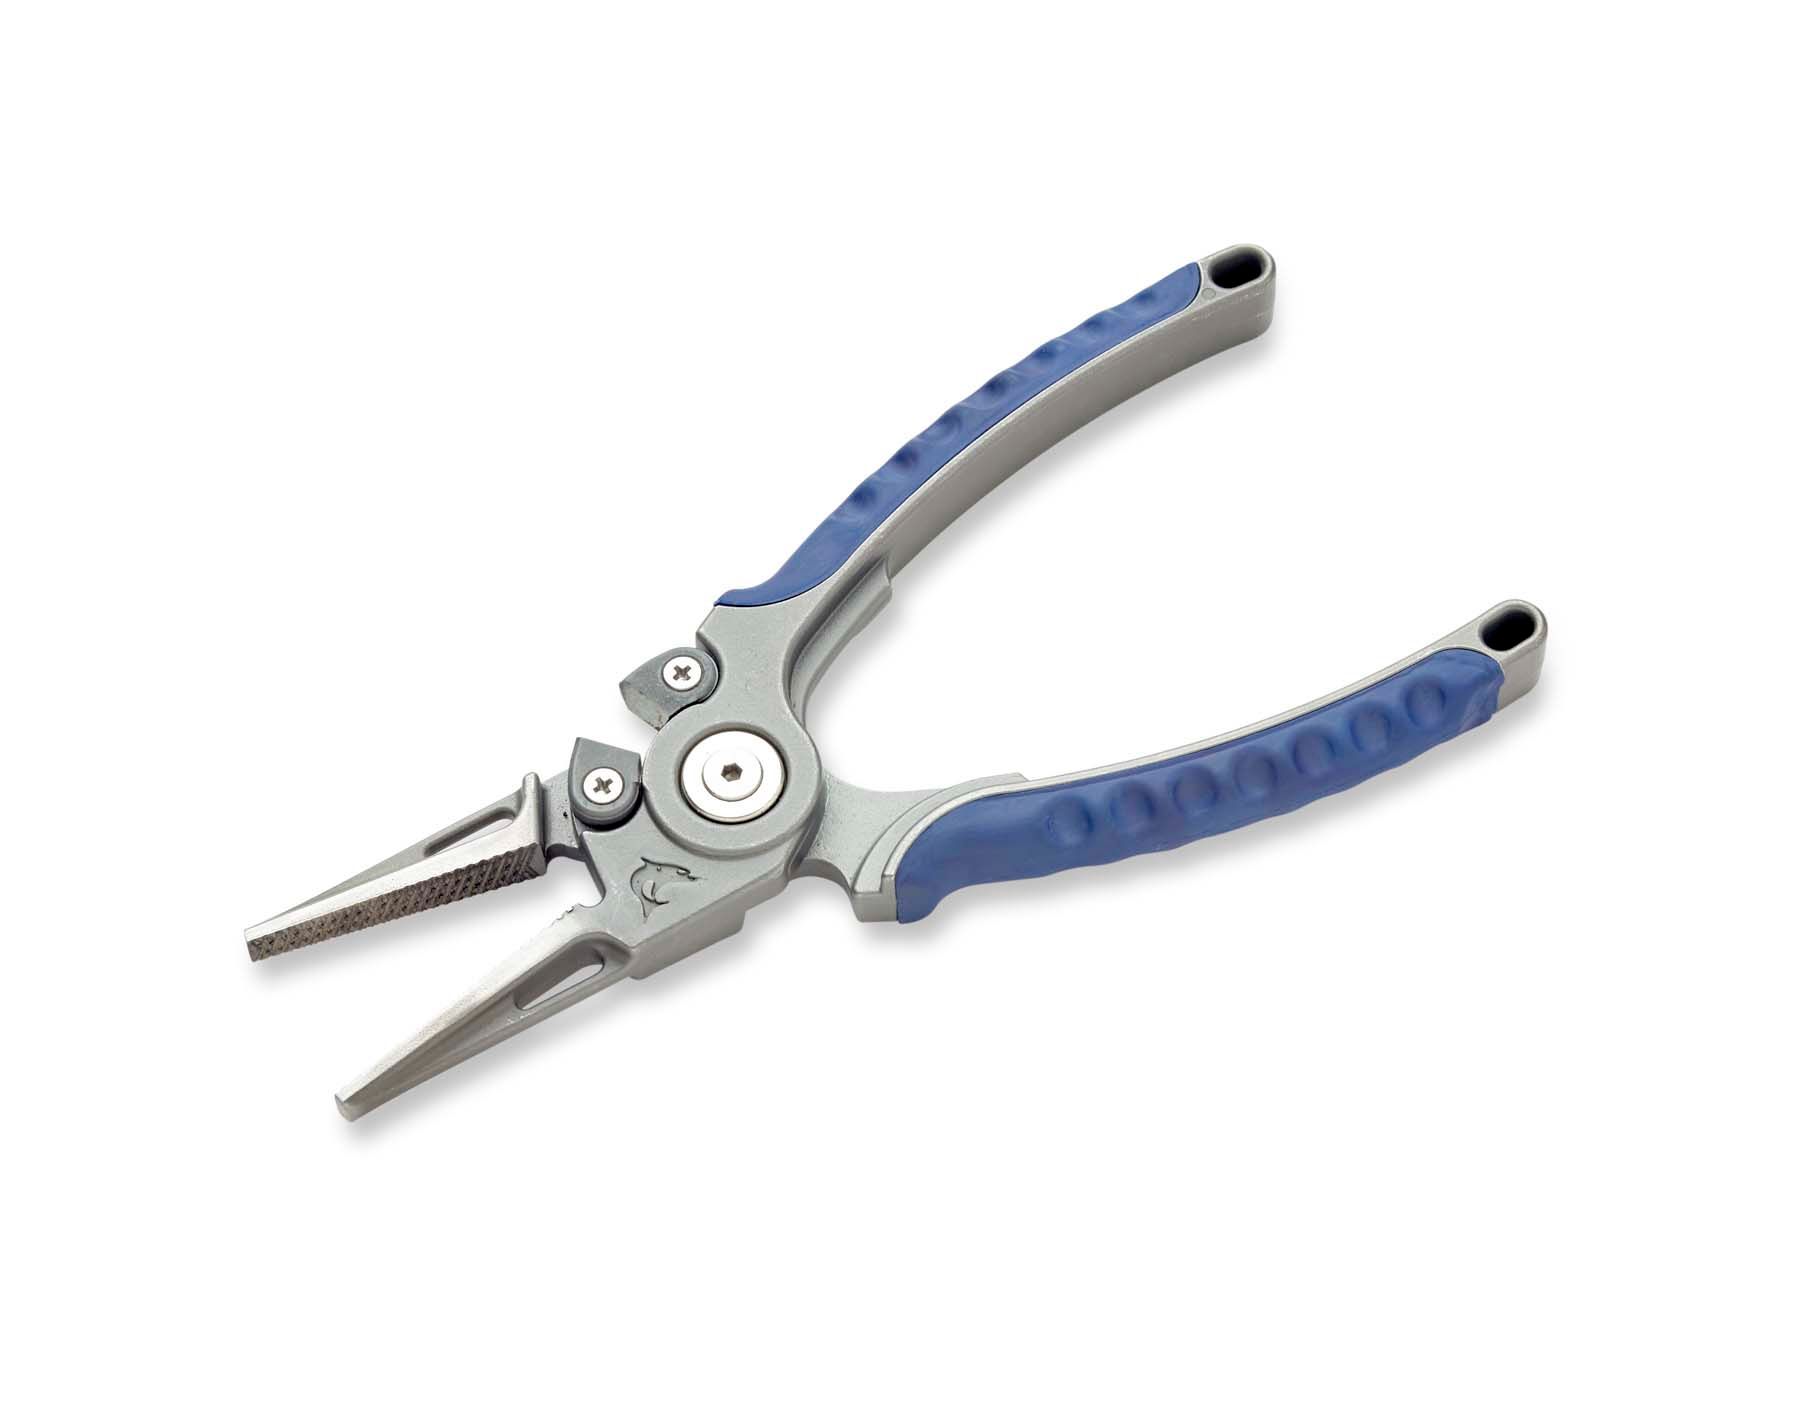  Amoygoog Stainless Steel Fishing Pliers, Fishing